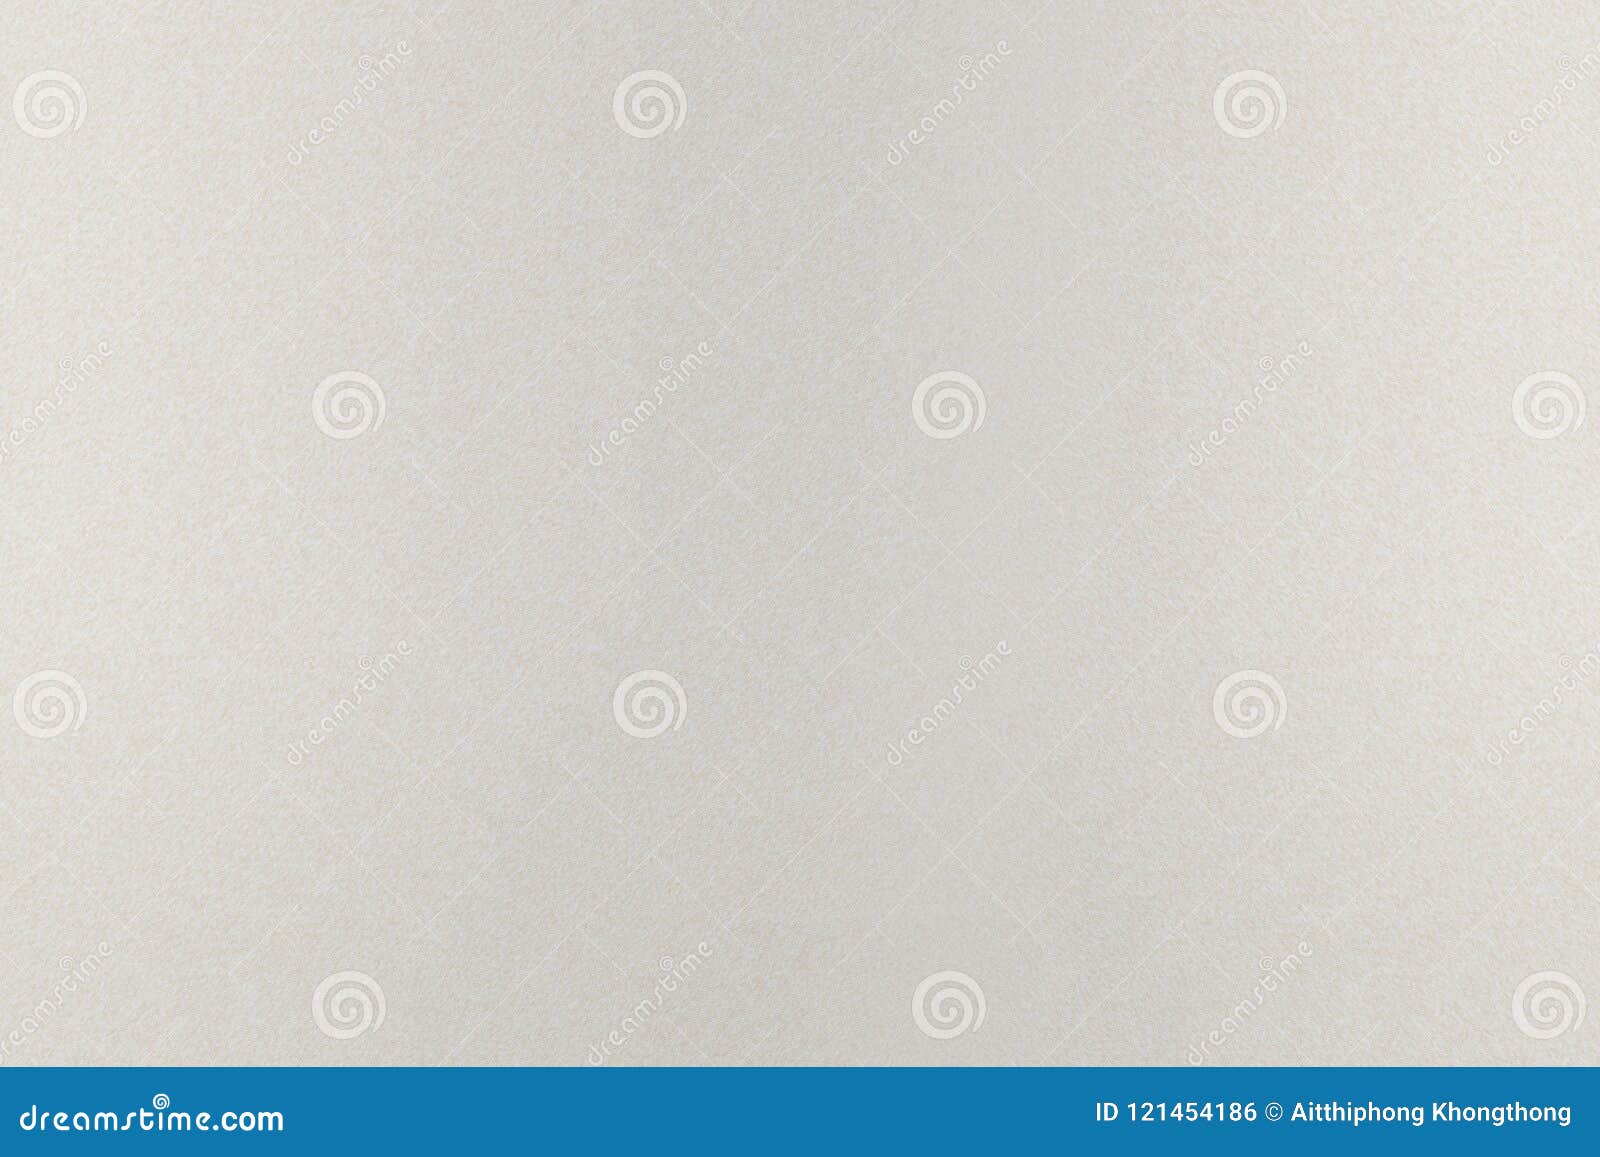 Texture Of White Hard  Paper  Abstract Background Stock  